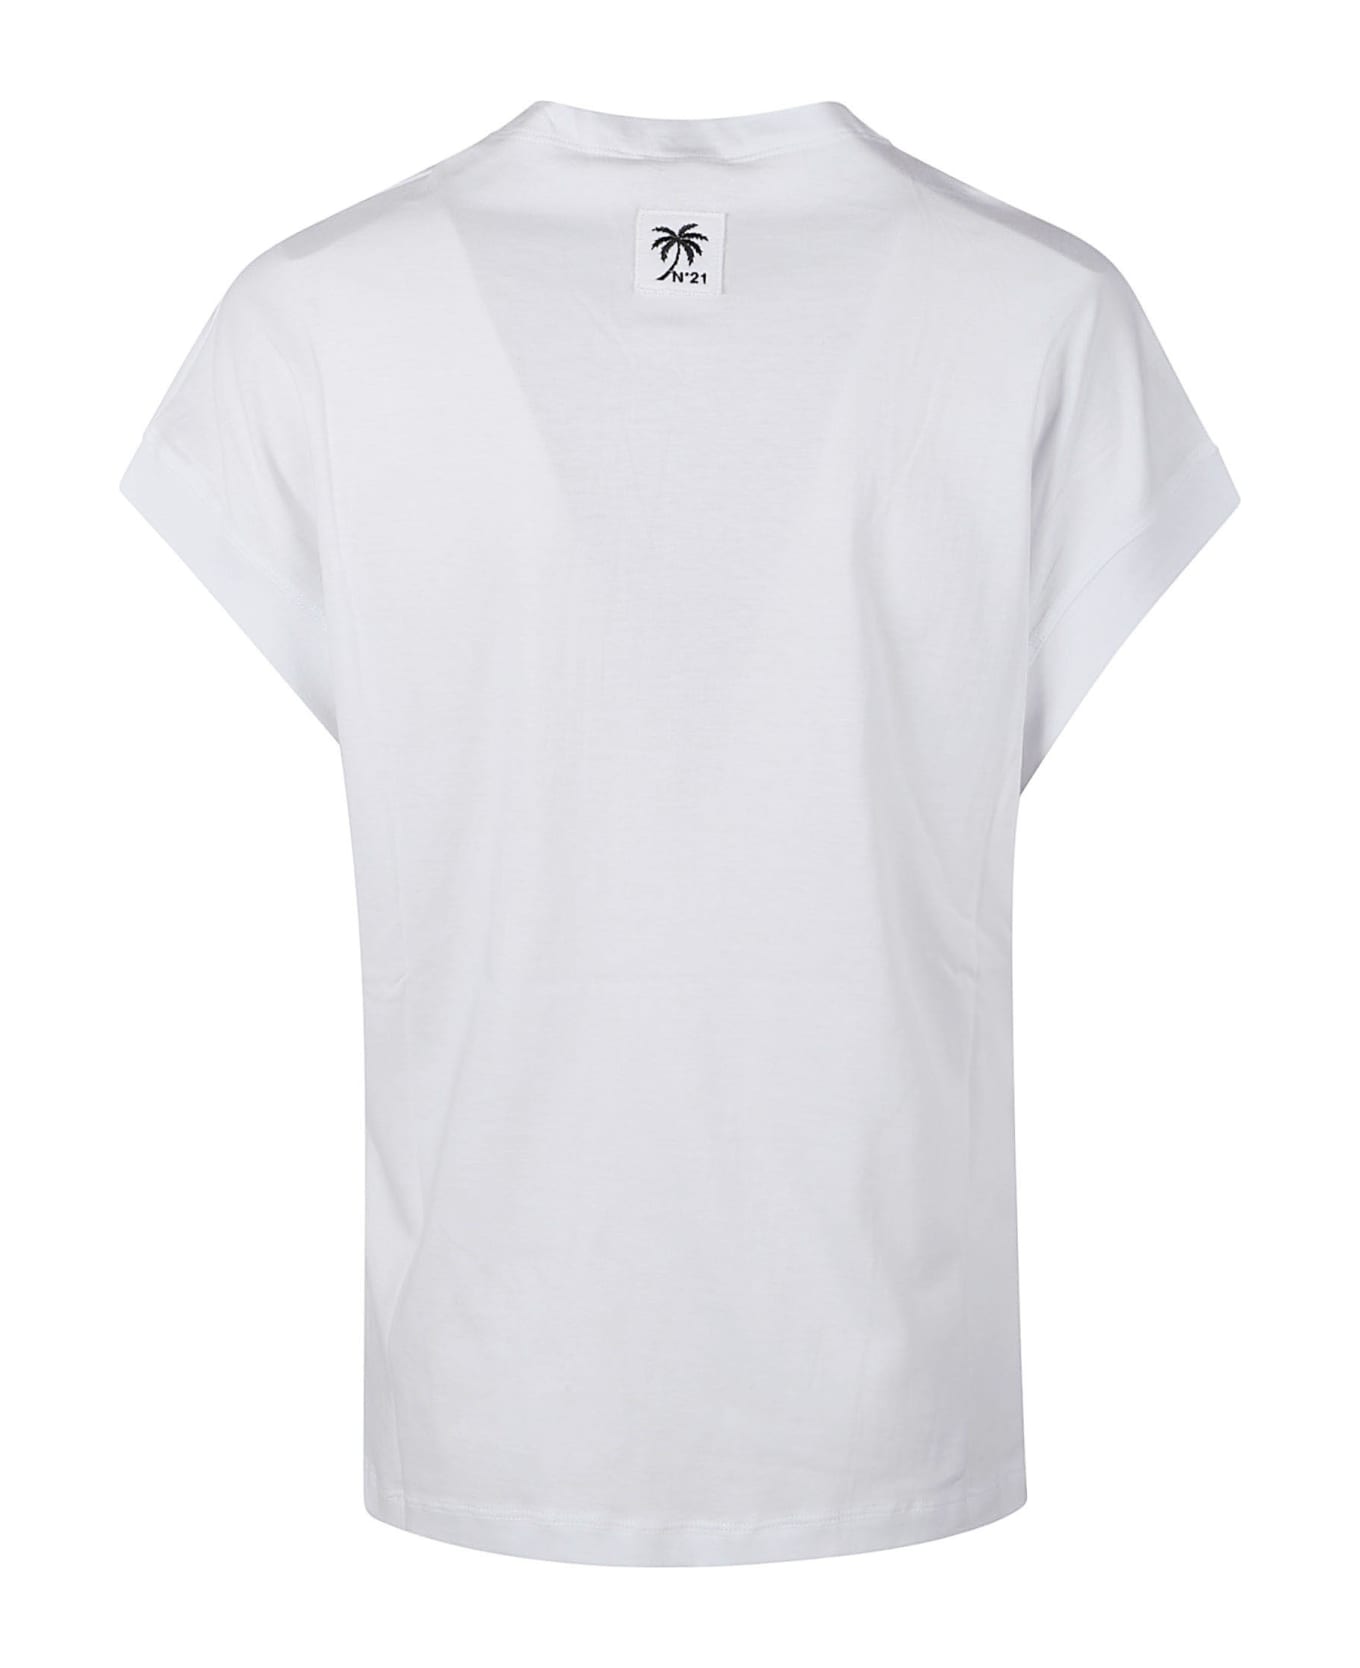 N.21 Logo Patched Wrap Front T-shirt - bianco ottico ブラウス